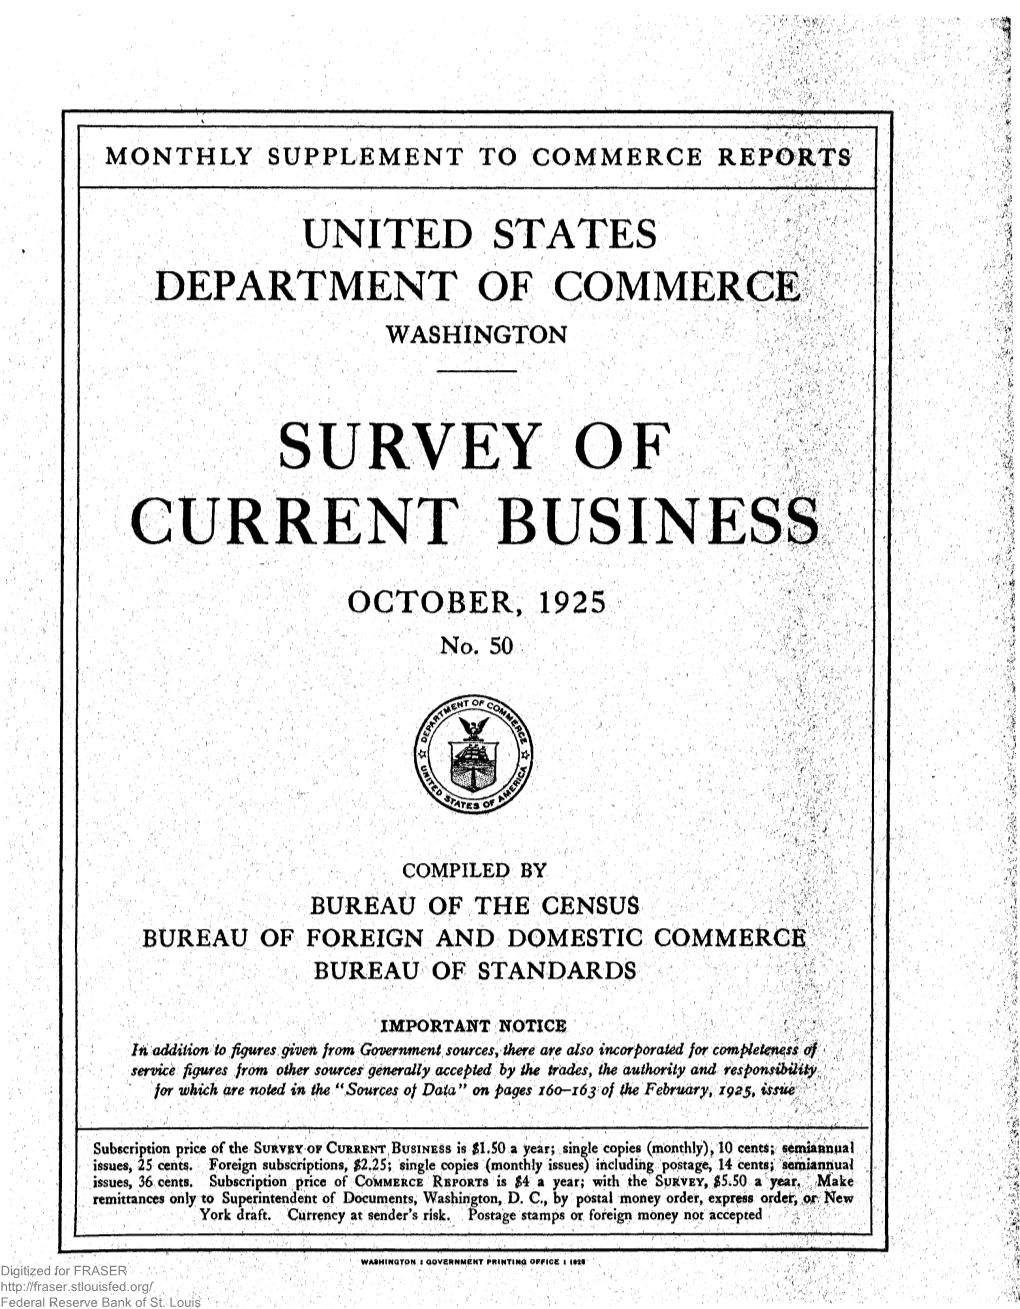 Survey of Current Business October 1925